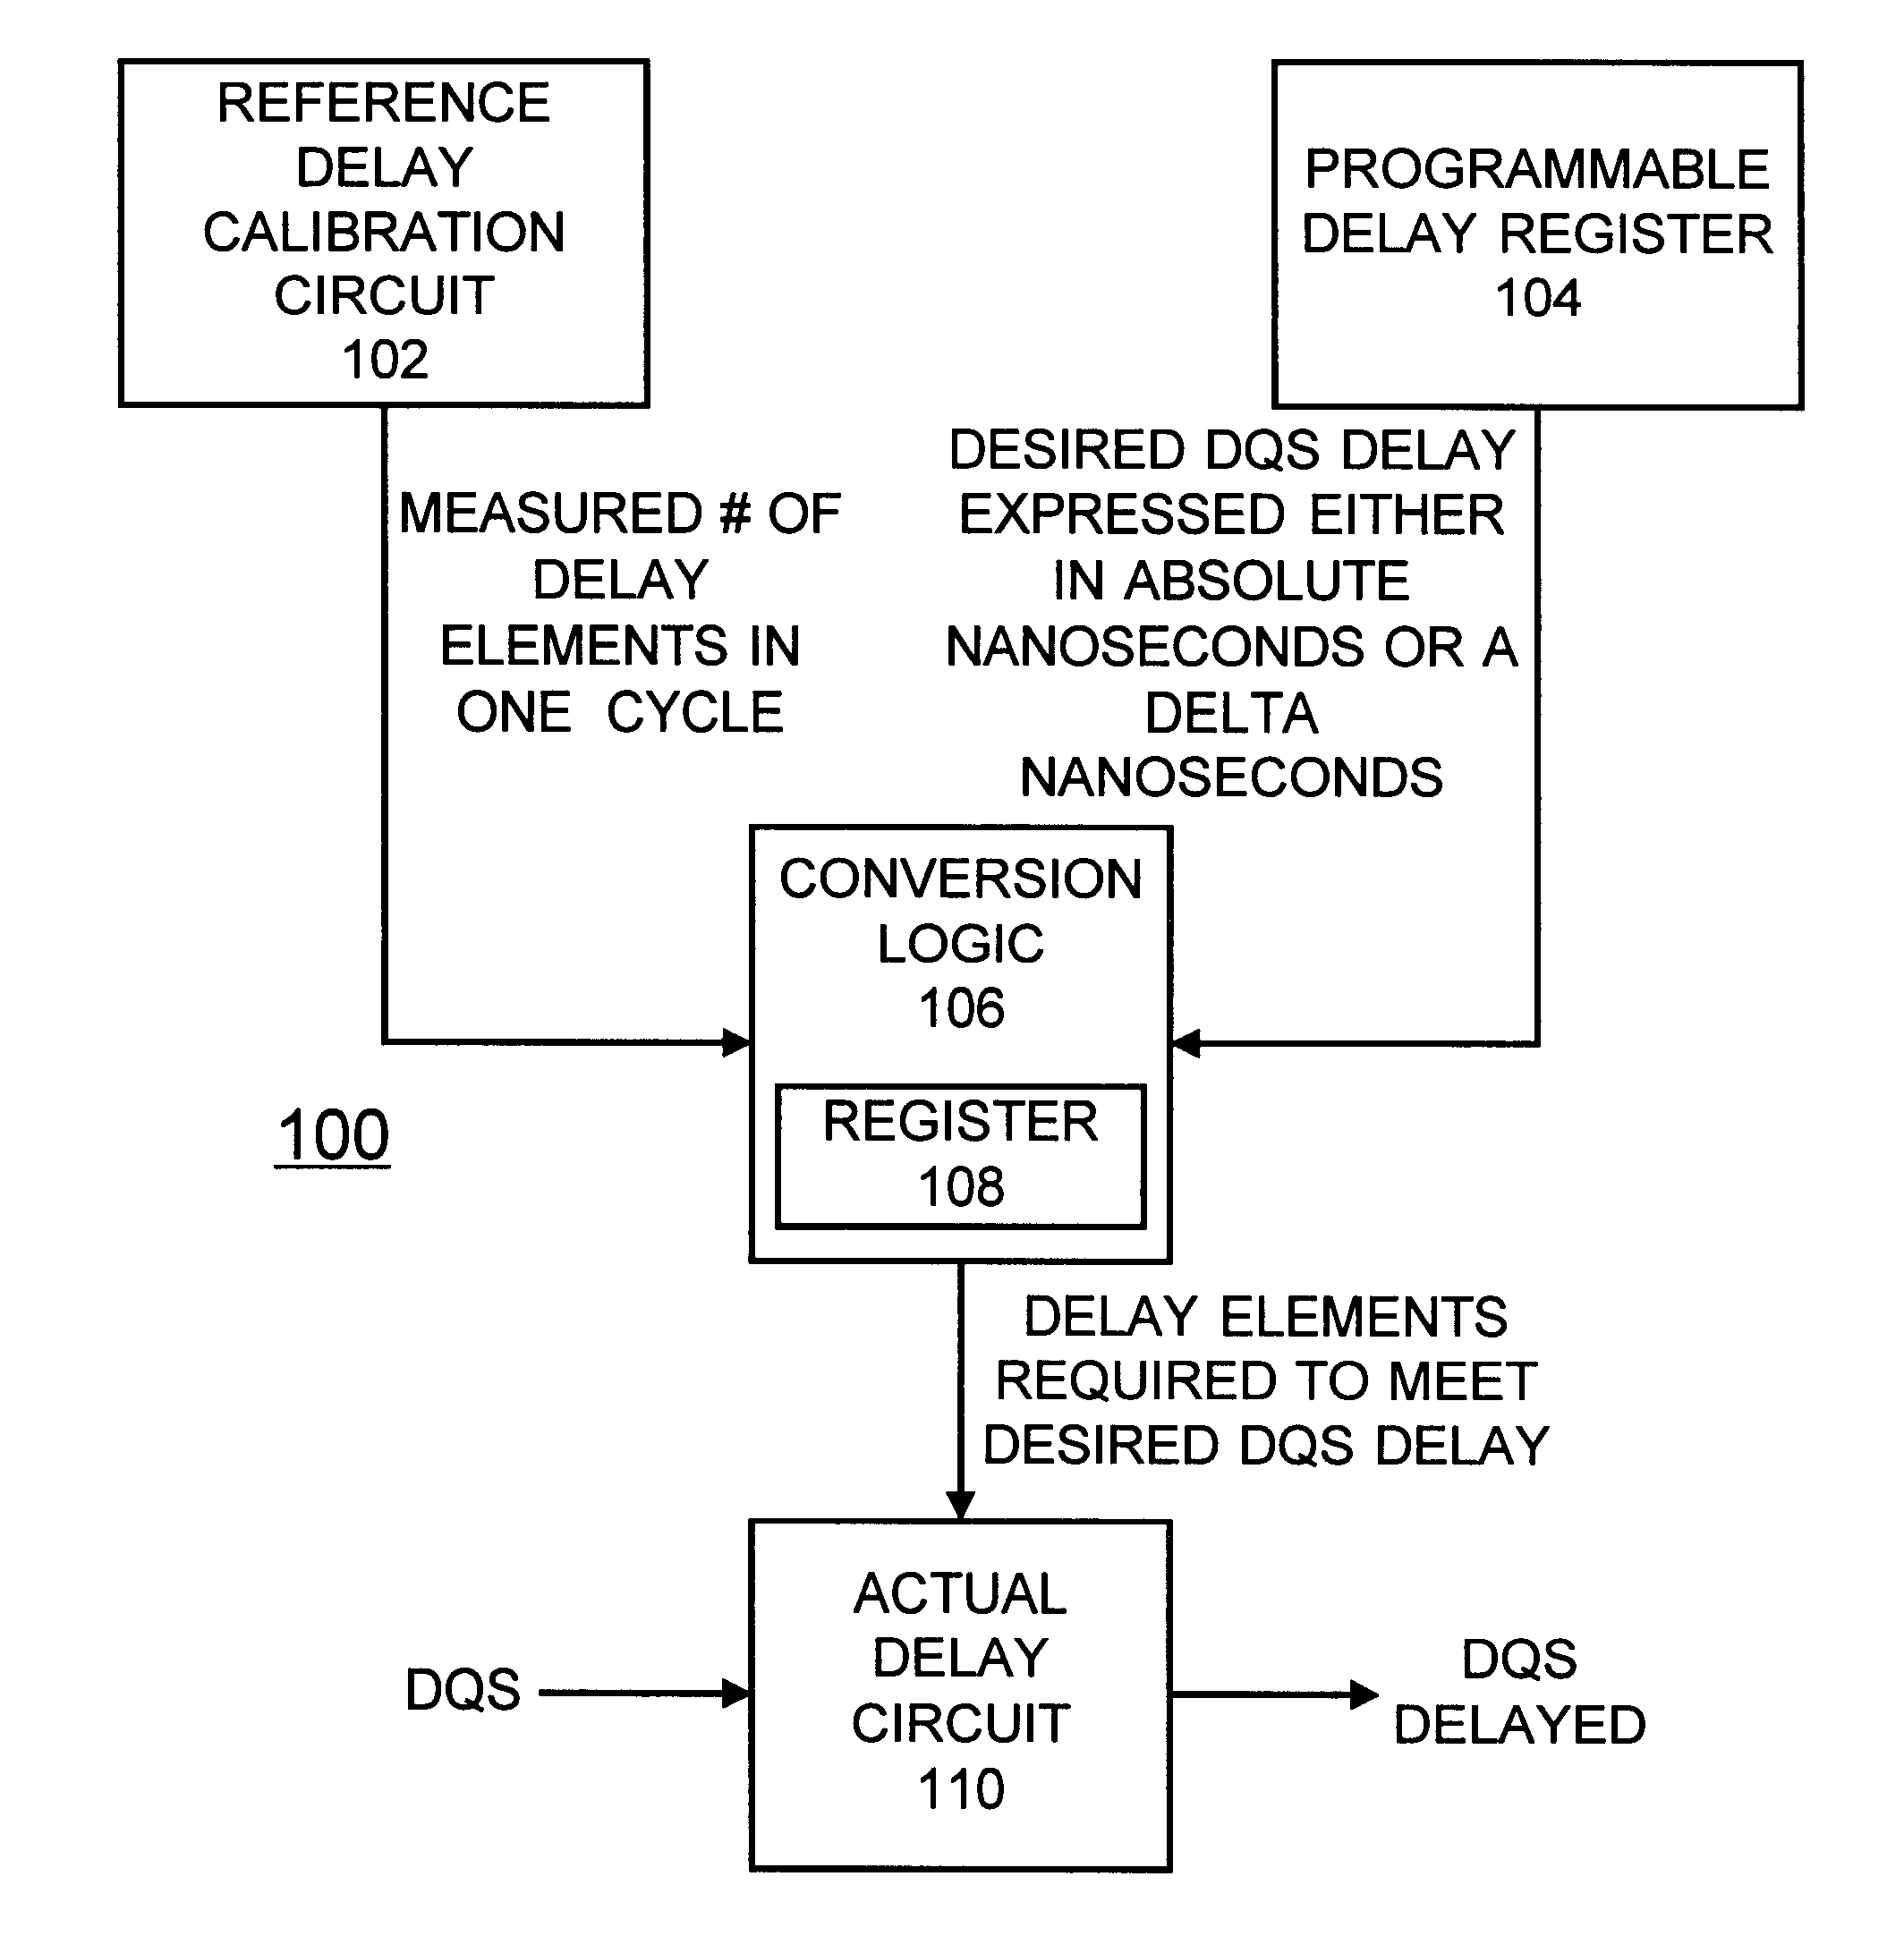 Programmable compensated delay for DDR SDRAM interface using programmable delay loop for reference calibration